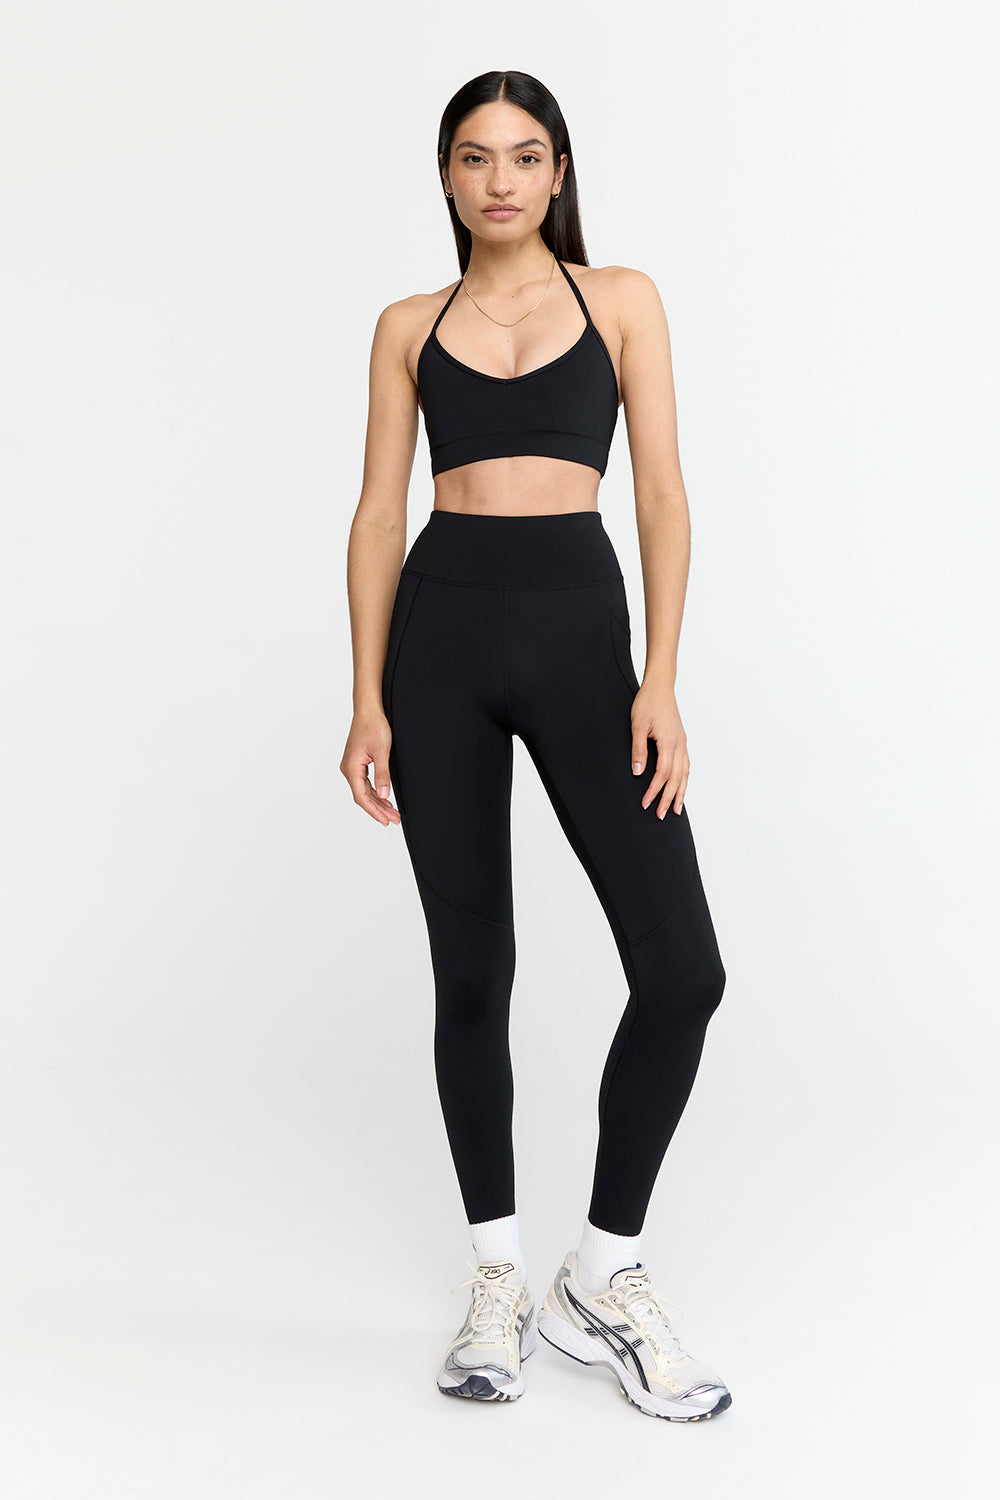 Shoppers say these breathable activewear pieces 'hold everything in